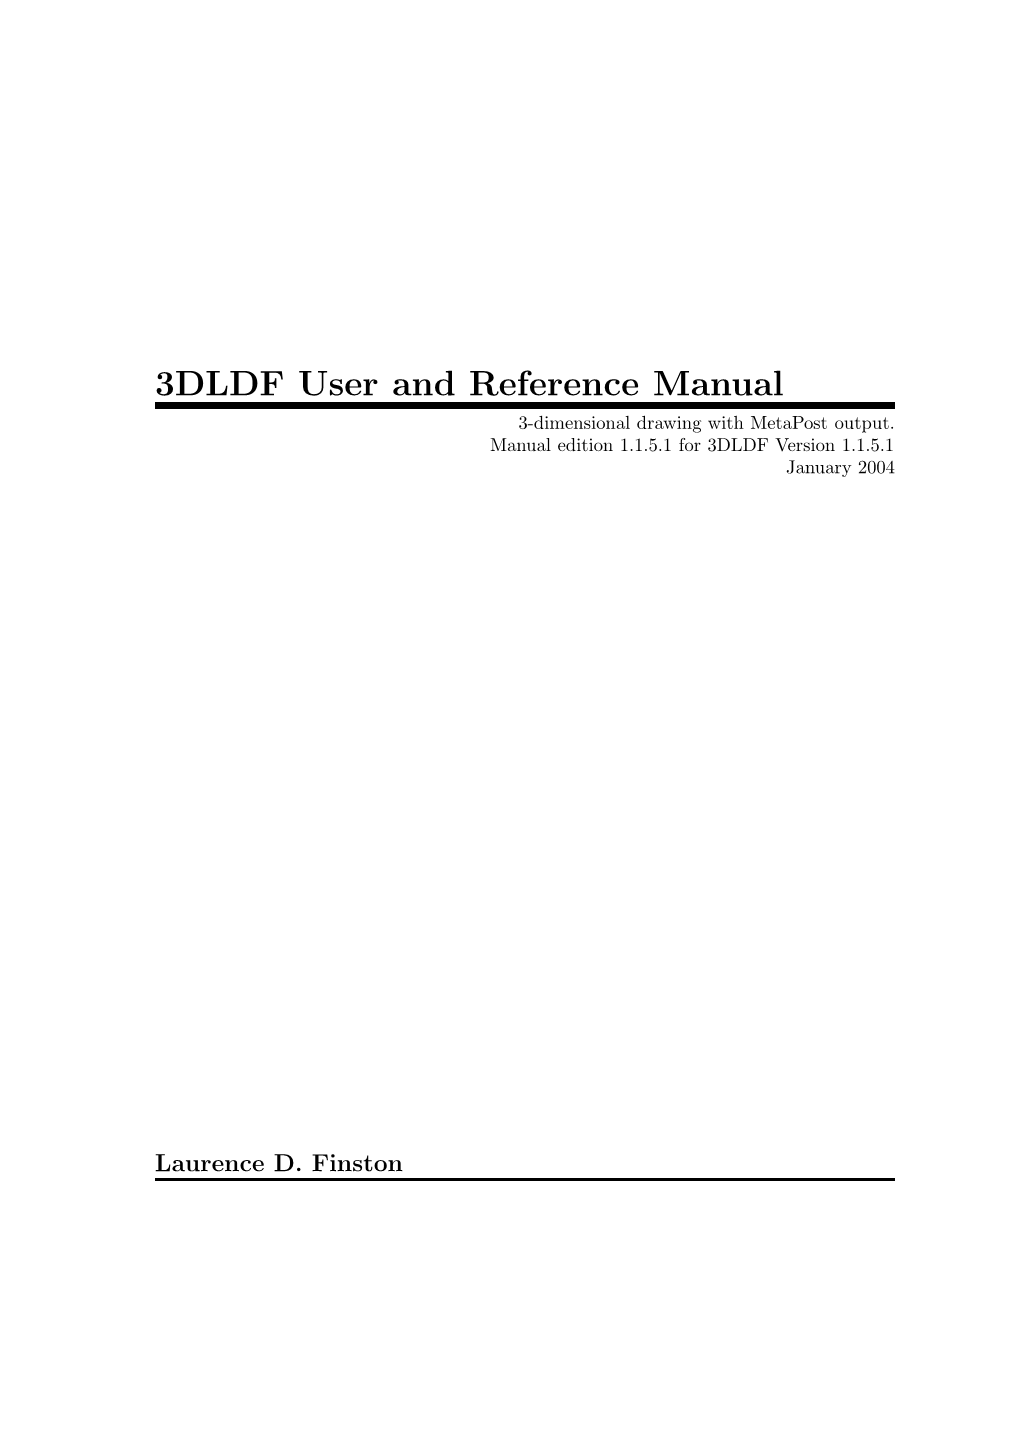 3DLDF User and Reference Manual 3-Dimensional Drawing with Metapost Output